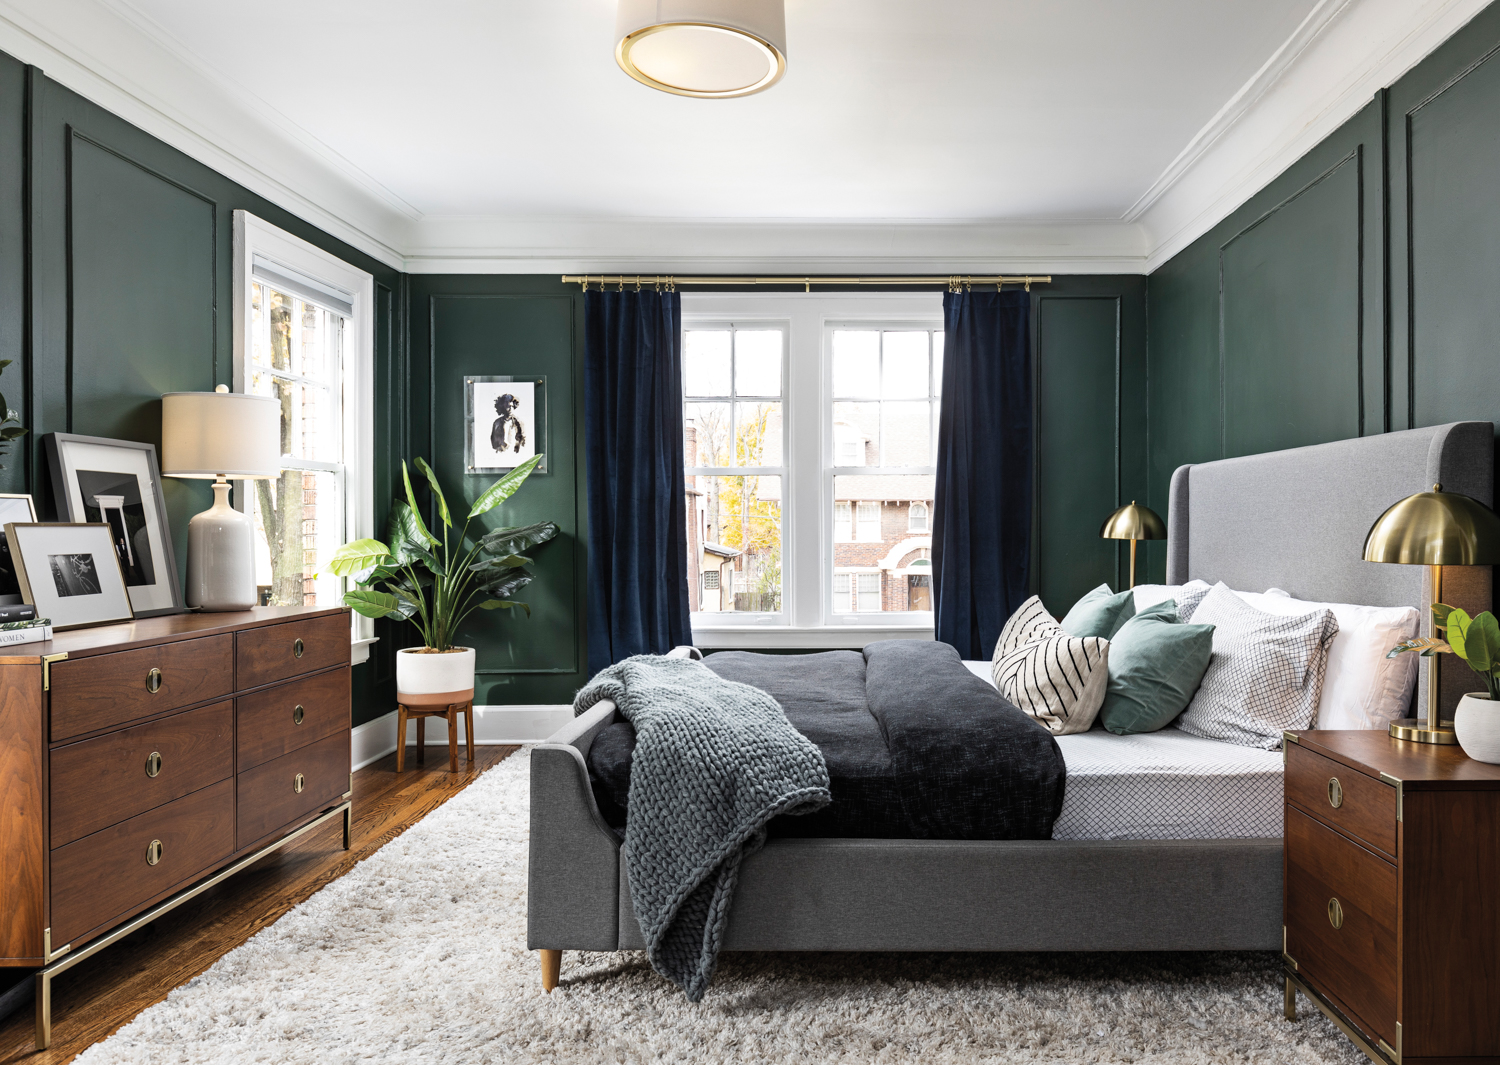 Bedroom with dark green walls, gray upholstered bed and fluffy white area rug on wood floors.